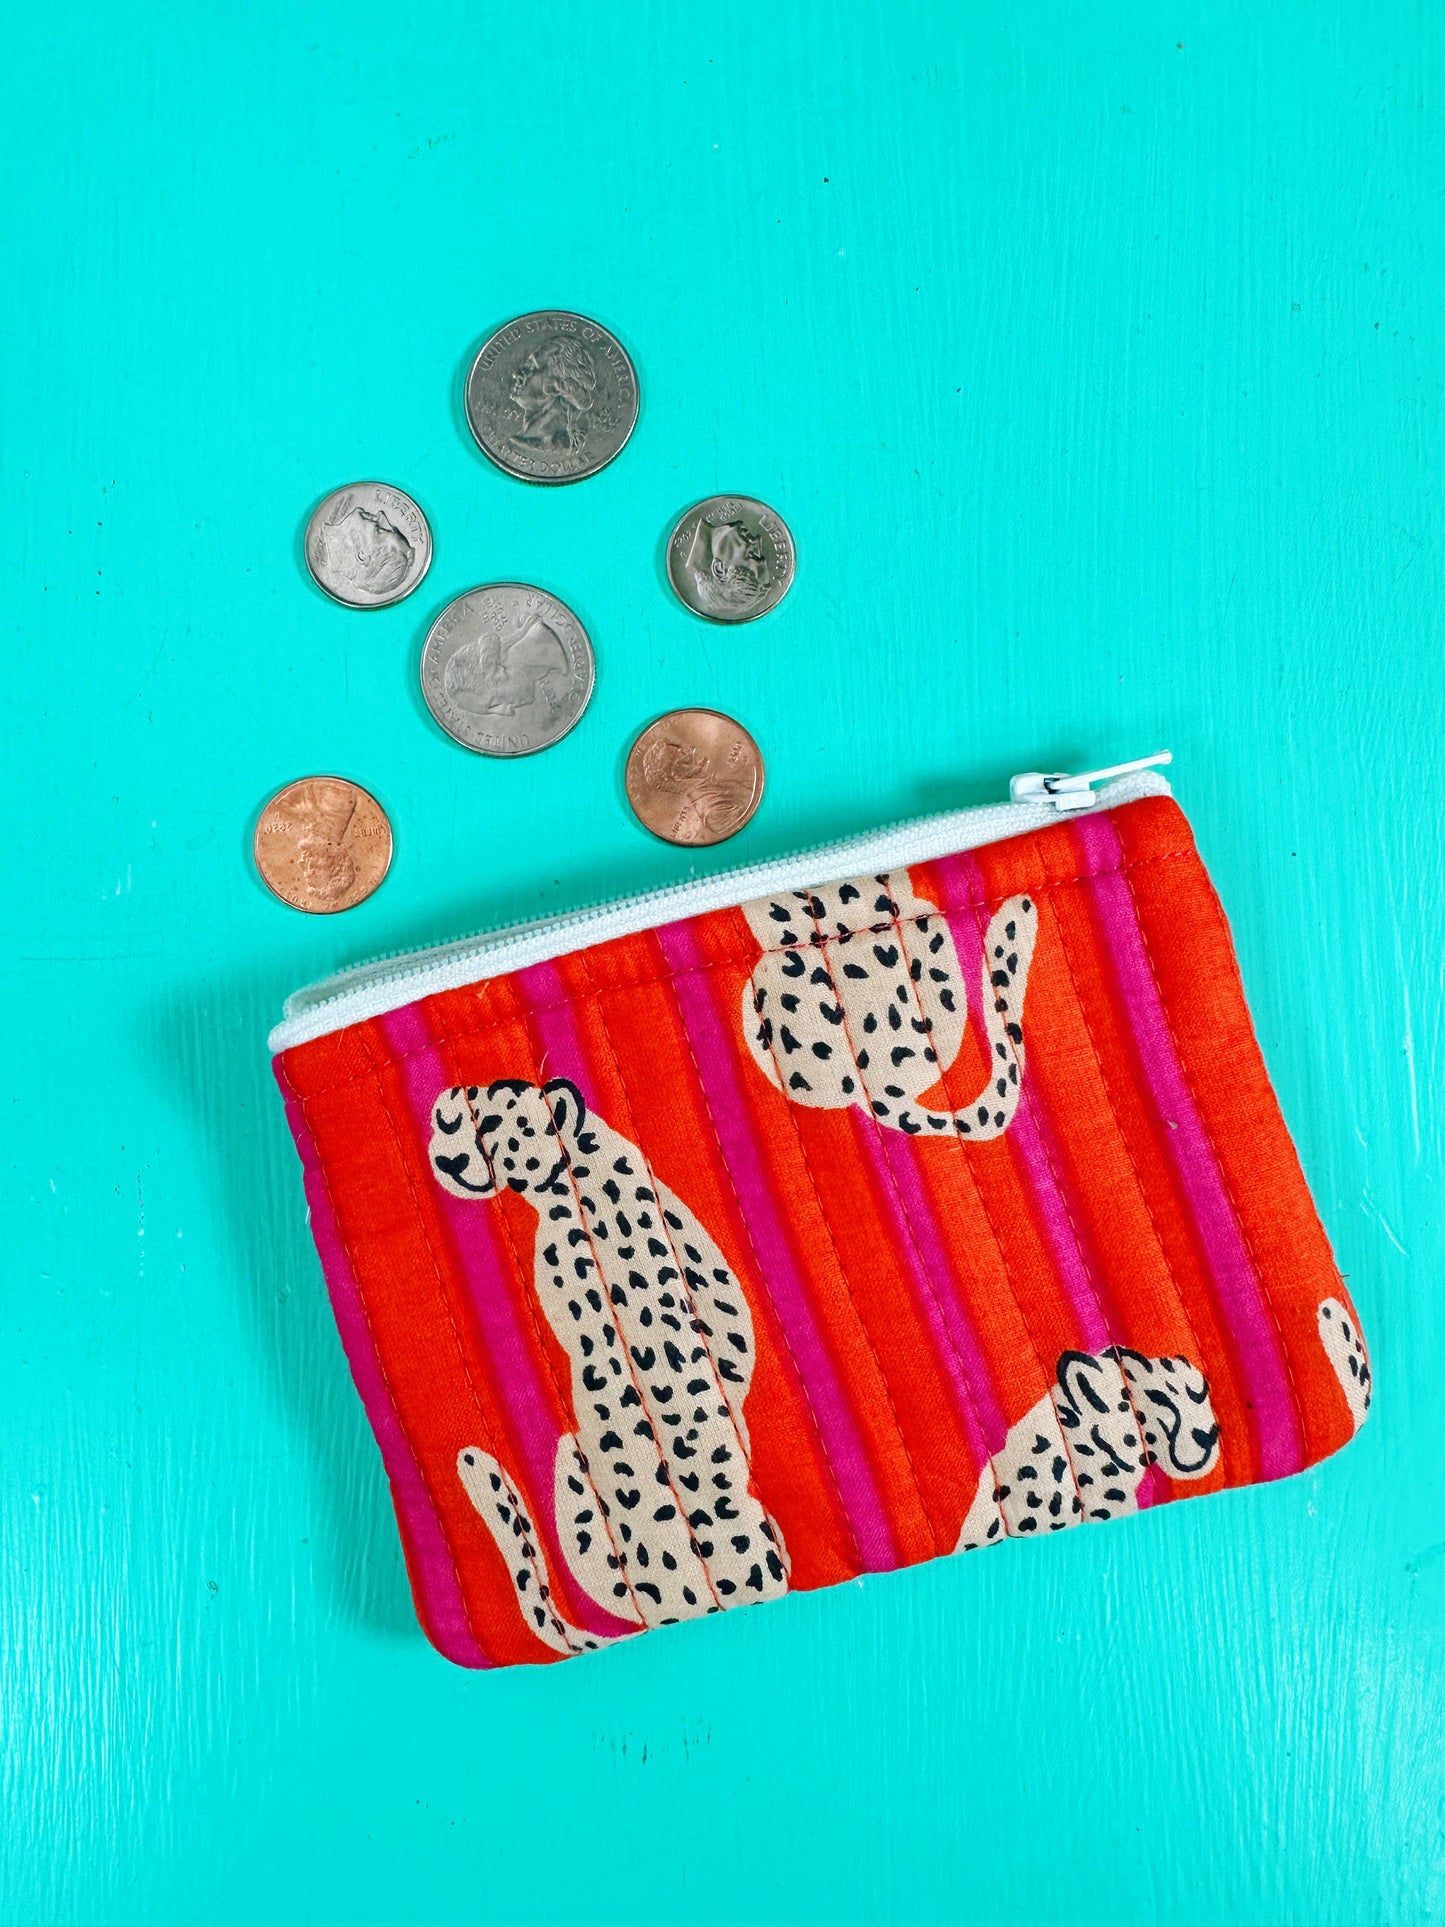 Small Quilted Coin Purse Pouch - Orange Pink Stripes Jaguars